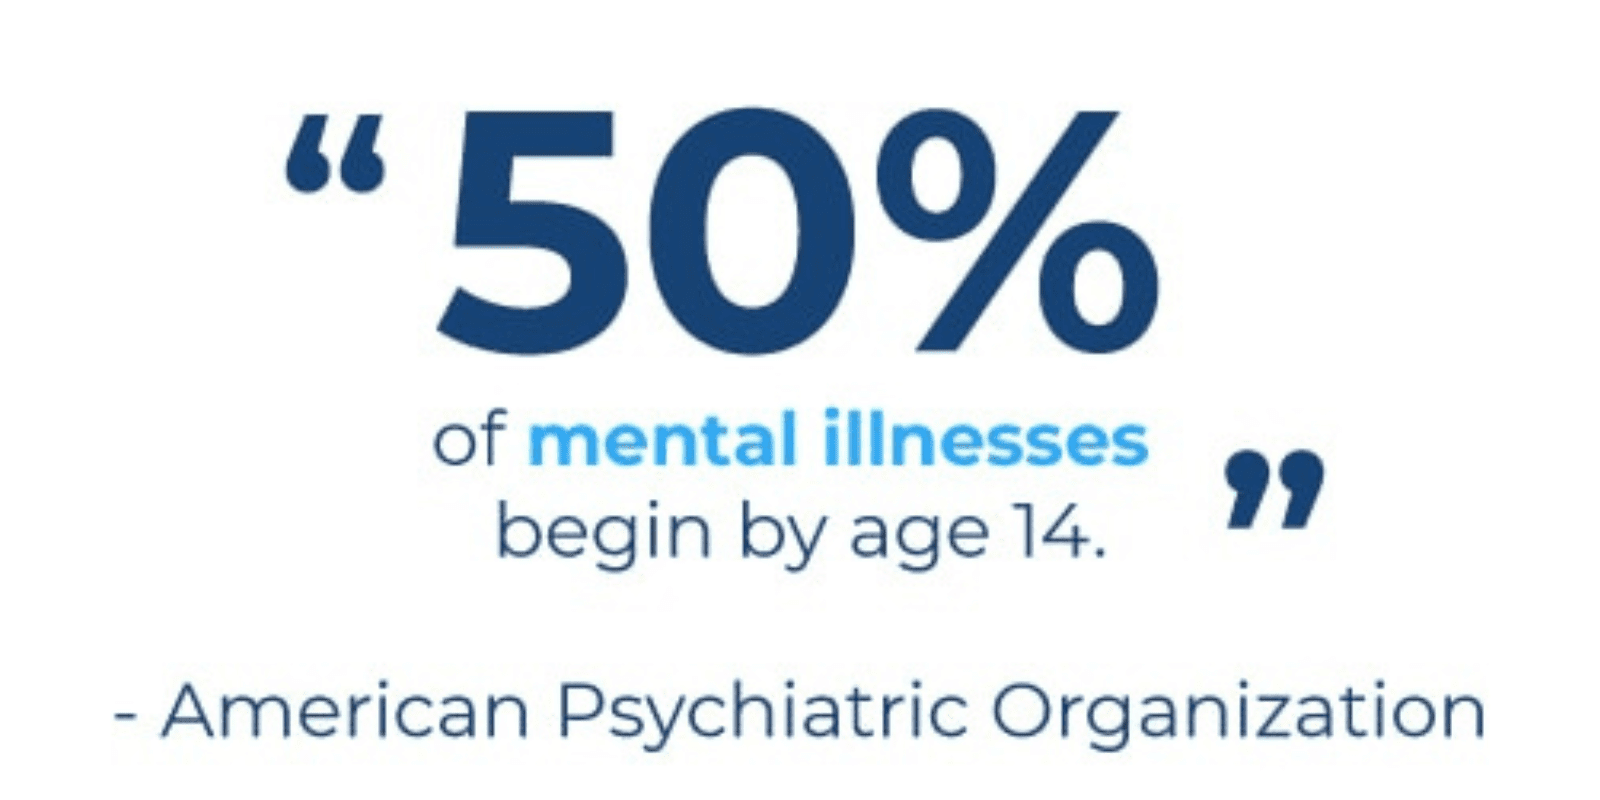 50% of mental illnesses begin by age 14